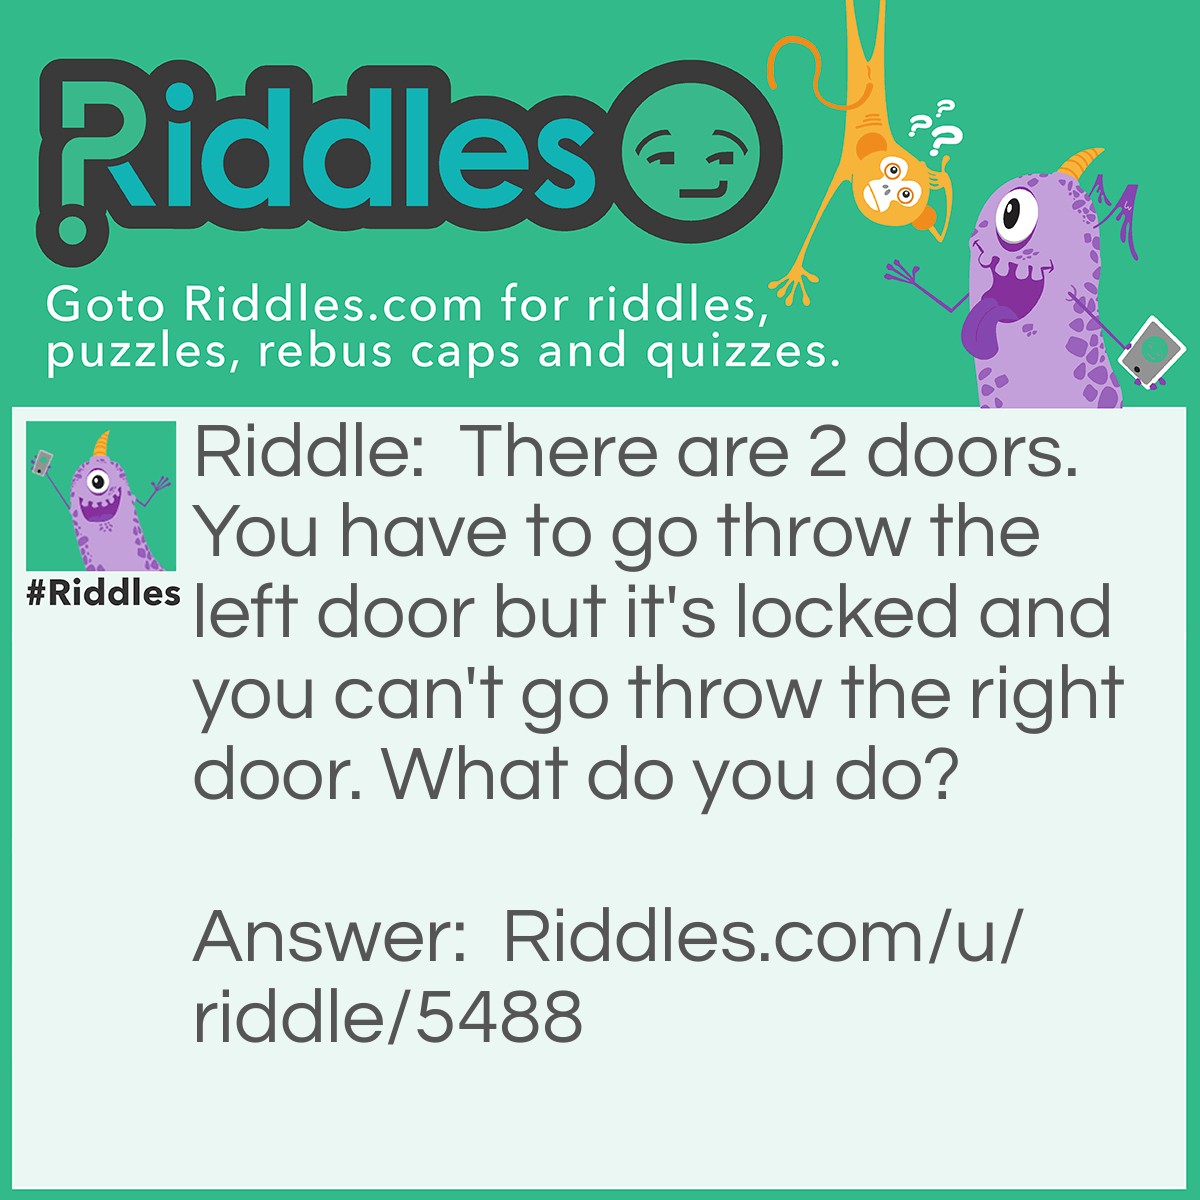 Riddle: There are 2 doors. You have to go throw the left door but it's locked and you can't go throw the right door. What do you do? Answer: Put your arm throw the right door and unlock the left door.